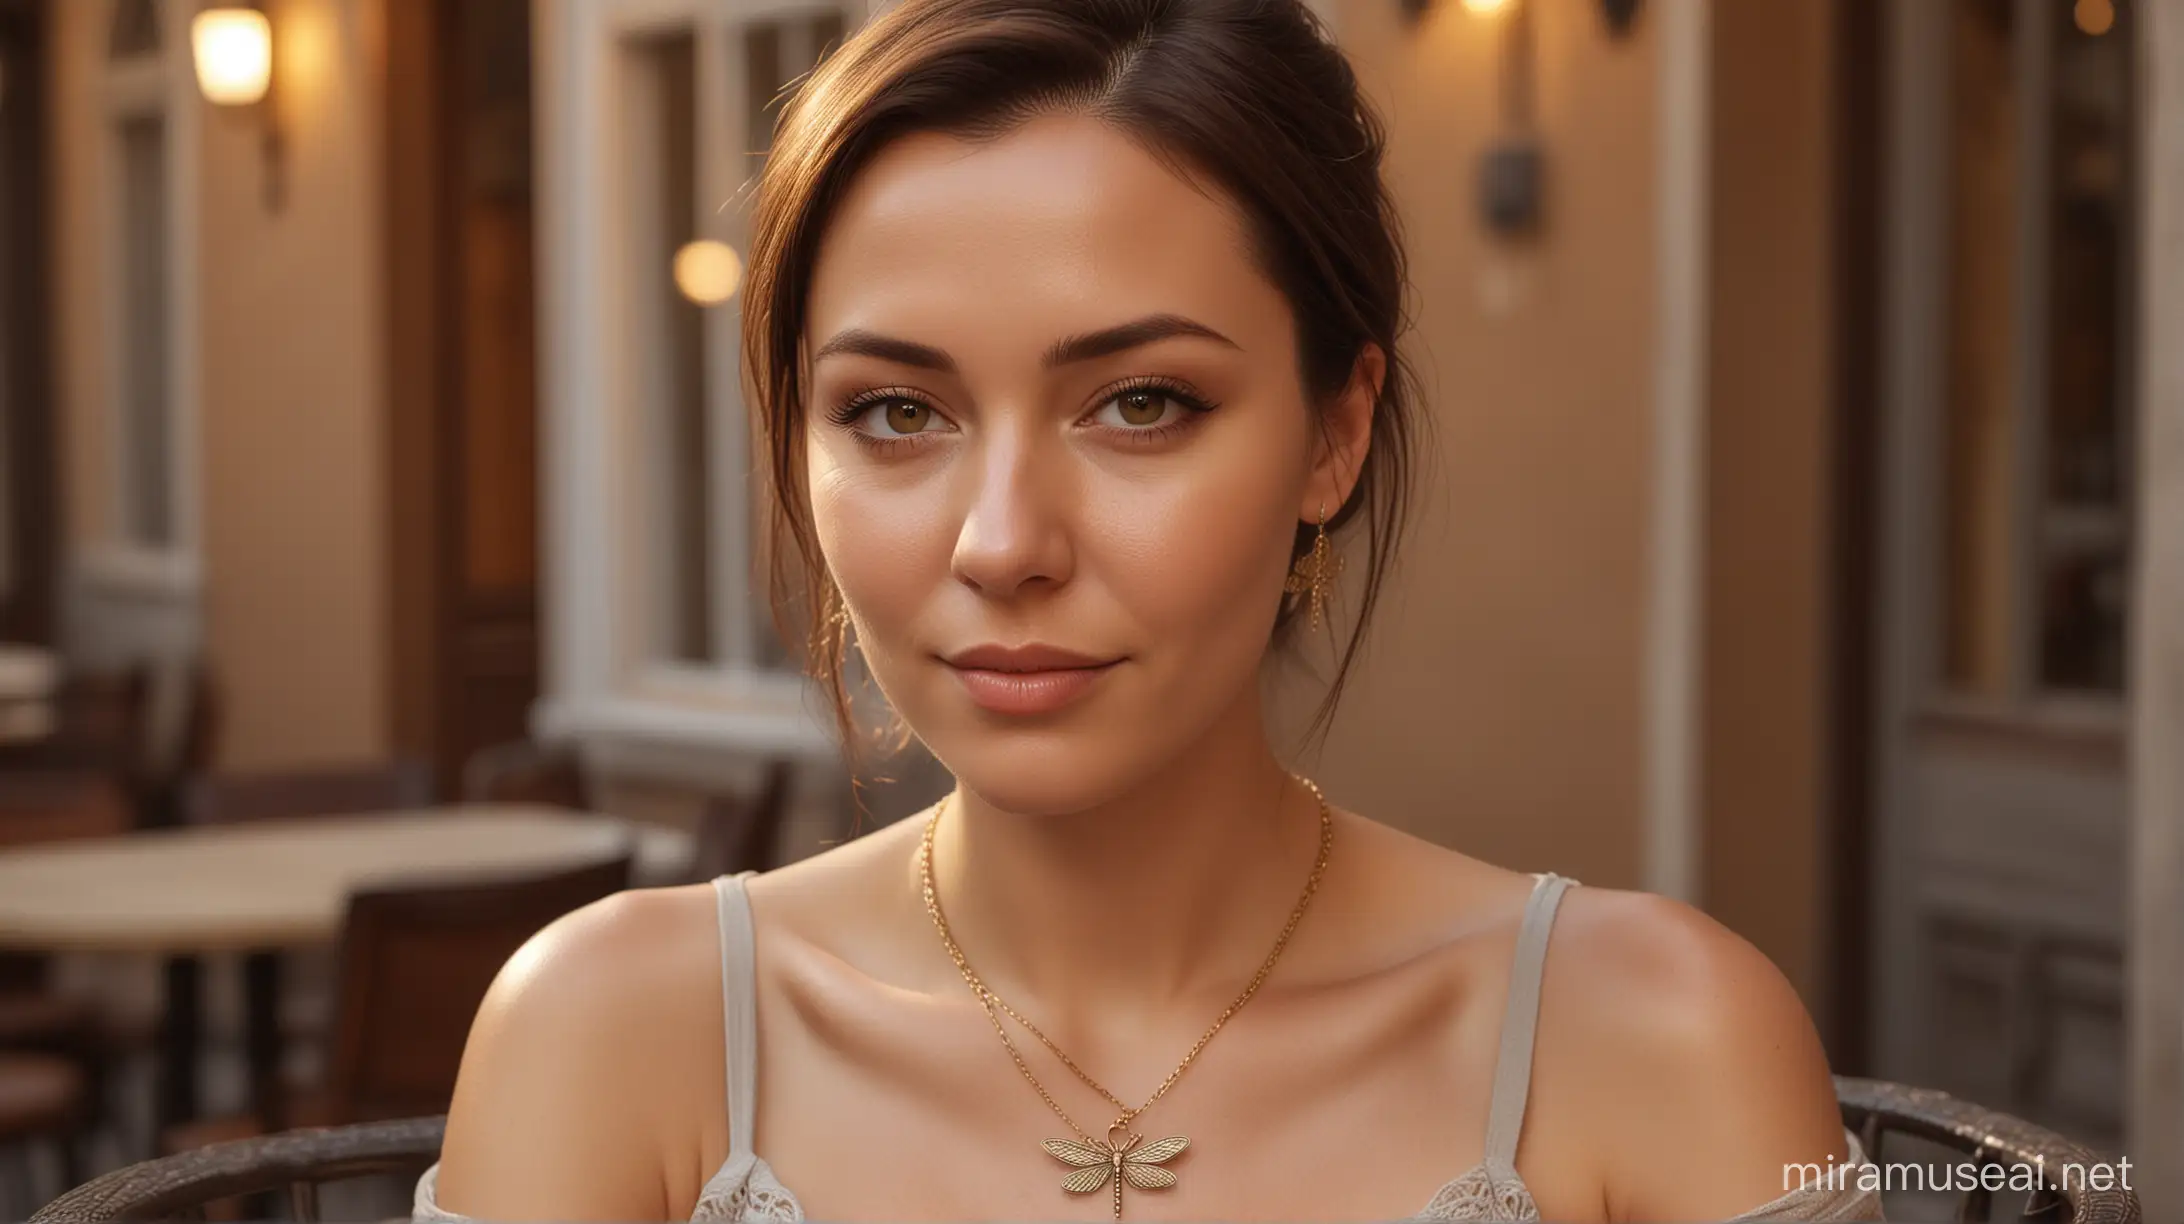 Close-up portrait of a 35-year-old Slavic woman with short dark brown hair, wearing a gold necklace with a dragonfly motif, in a cozy cafe terrace setting, high-realism, detailed facial features, professional photography, warm ambient lighting, realistic textures, detailed necklace, realistic portrait, cozy atmosphere, subtle expressions, detailed hair, professional, cafe background, ambient lighting, warm tones, realistic rendering